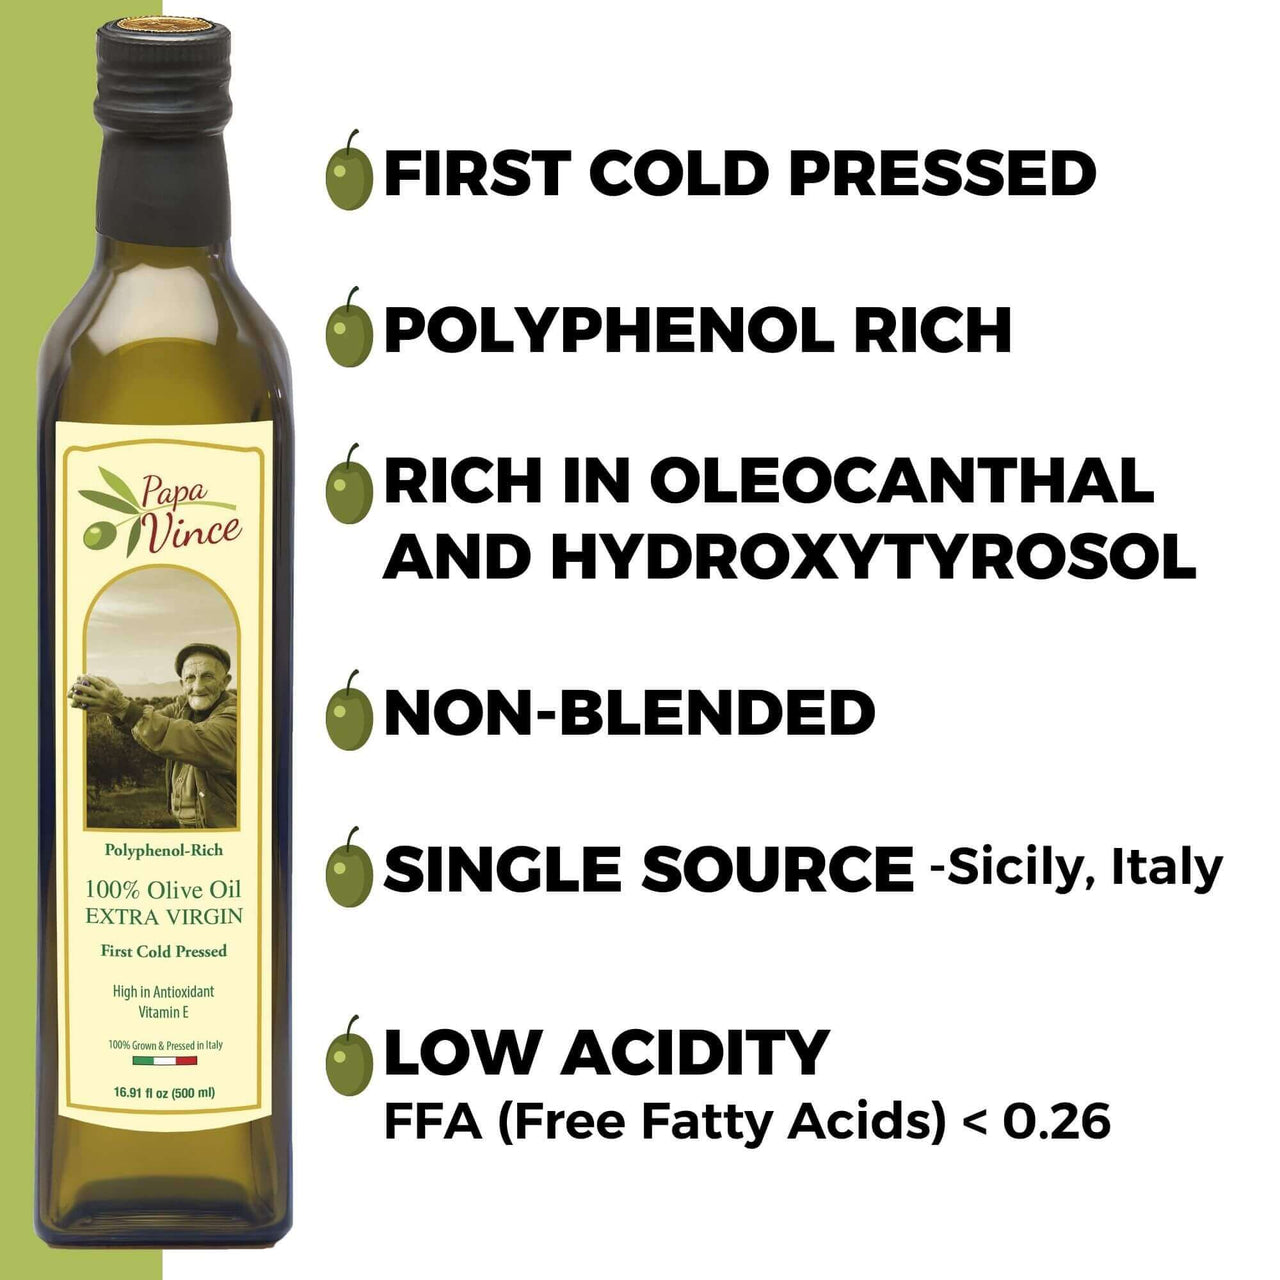 Papa Vince Olive Oil Extra Virgin Gift - Unblended, Family Harvest 2022/23, High in Polyphenols, Single Estate, First Cold Pressed, Sicily, Italy, Peppery Finish, Unfiltered, Unrefined, Velvet Burgundy - Papa Vince